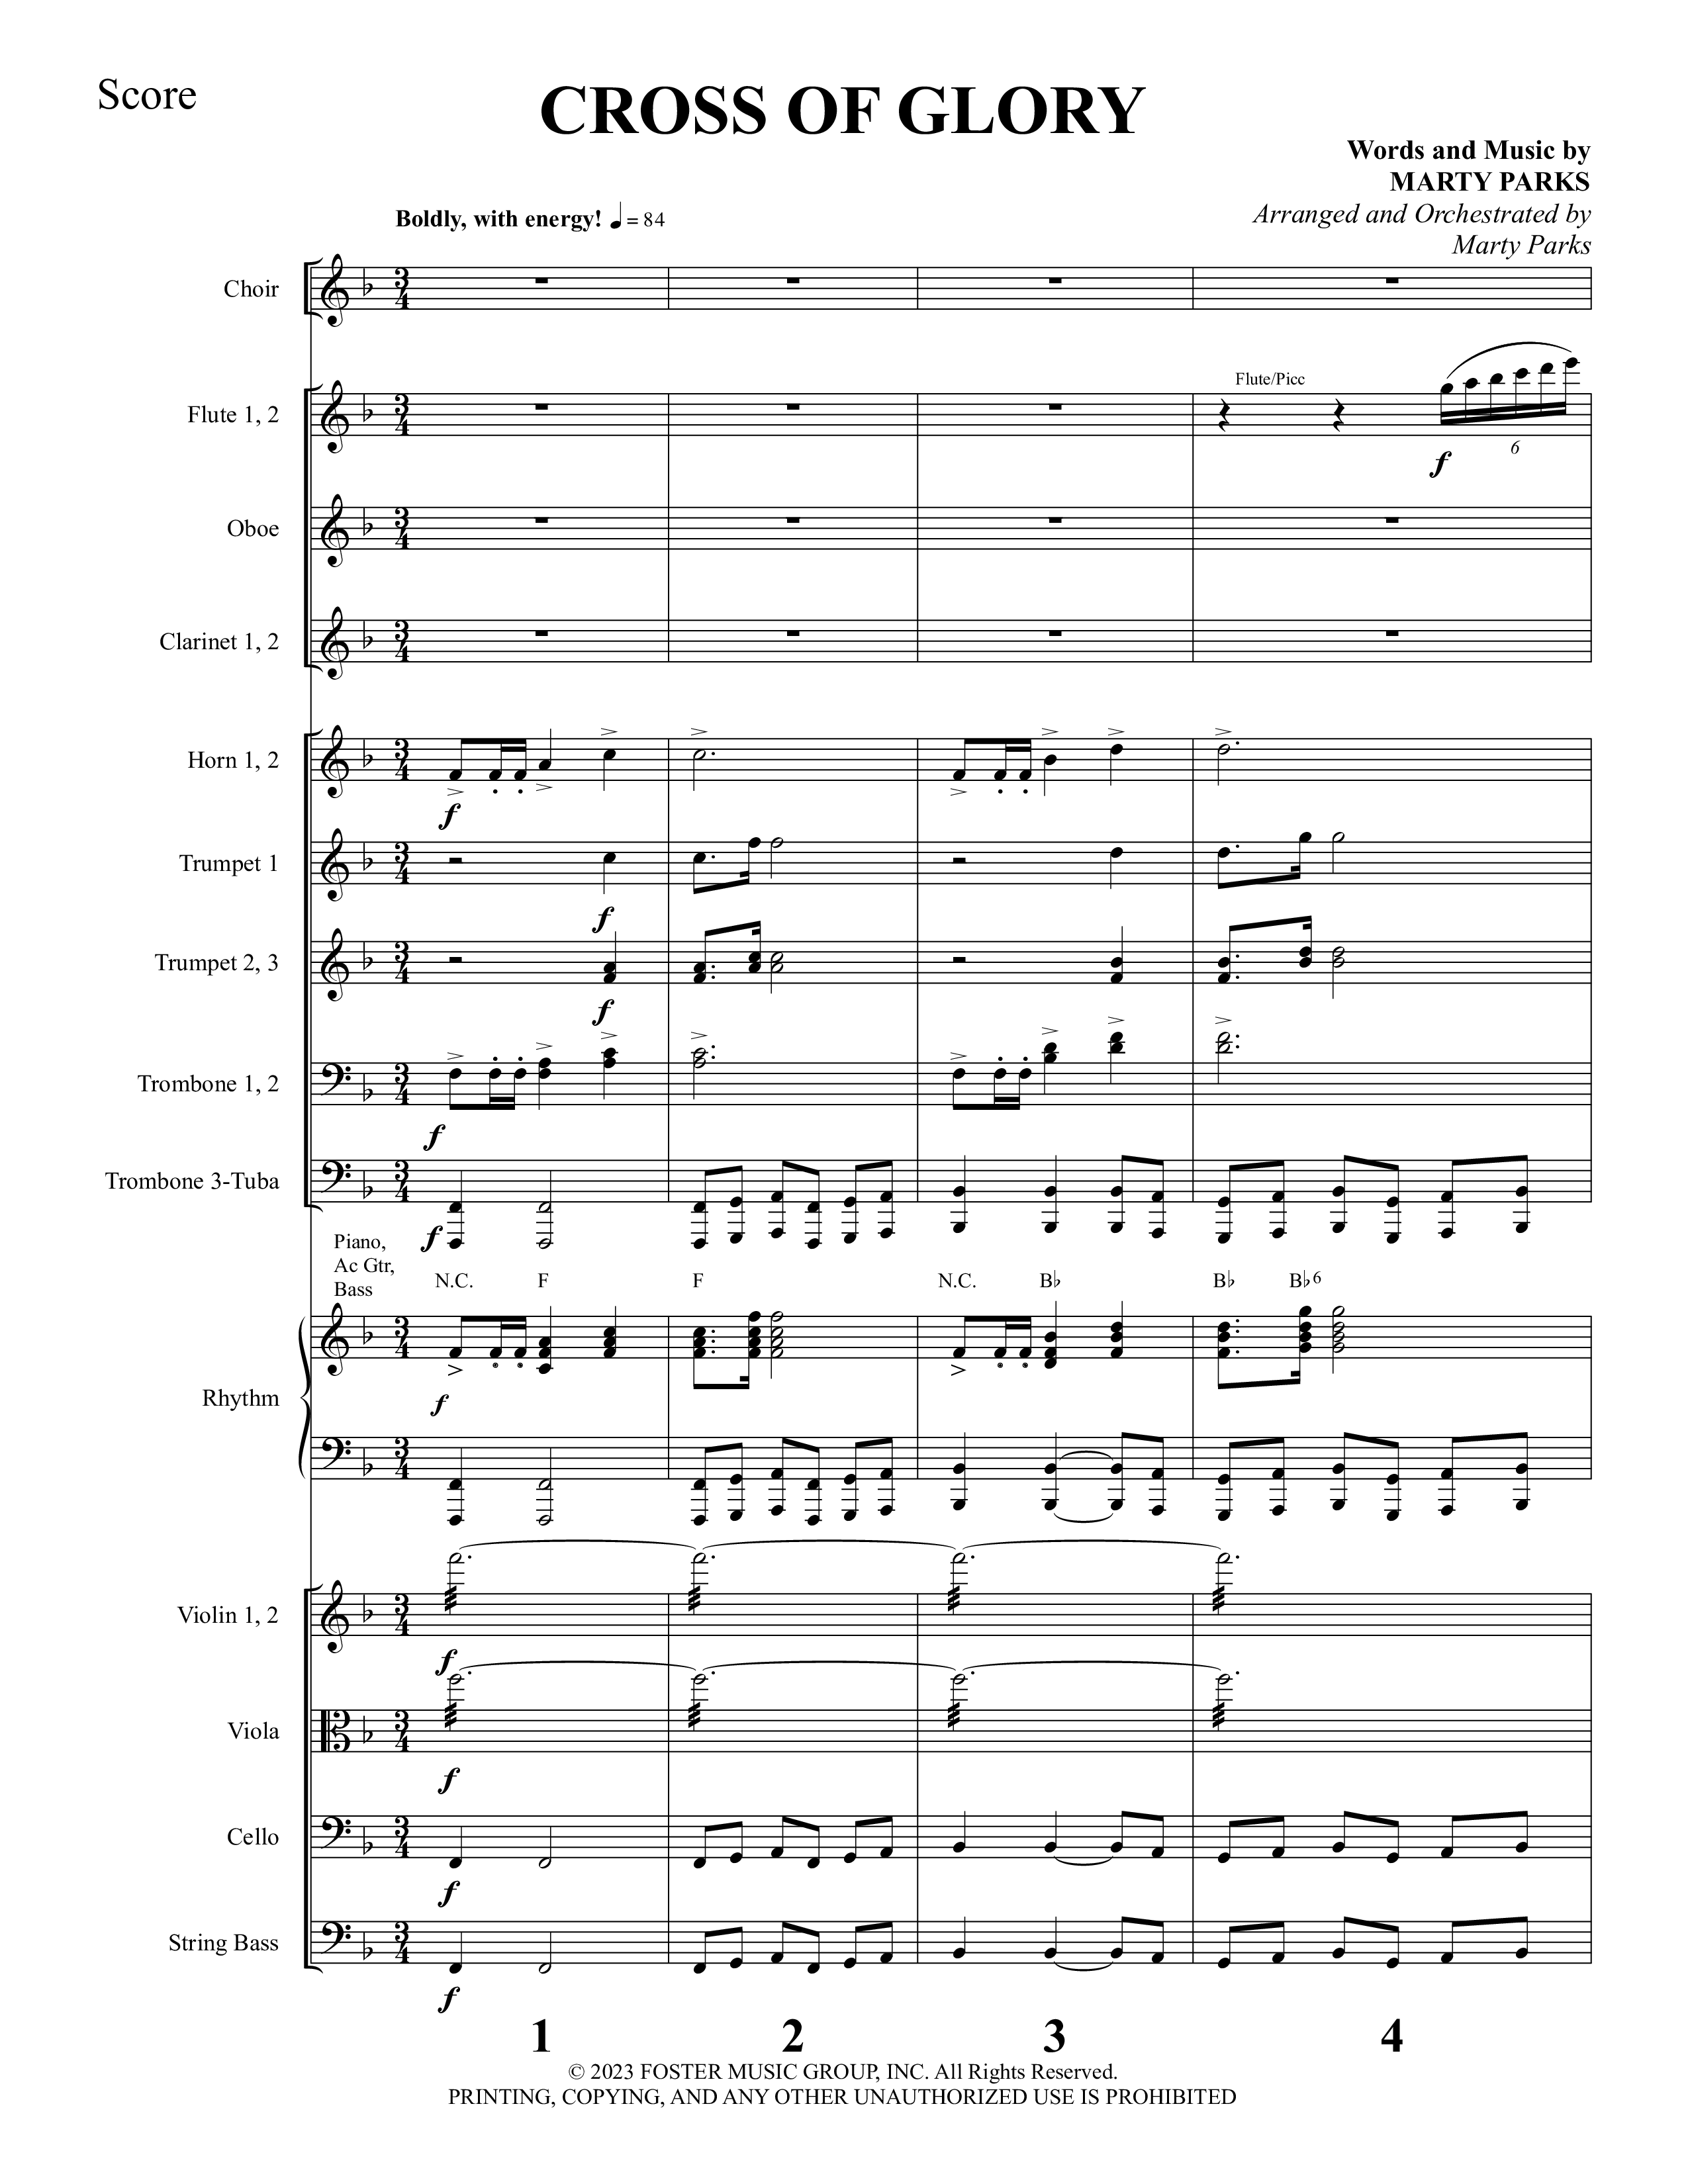 Glorious Cross (5 Song Choral Collection) Song 1 (Orchestration) (Foster Music Group / Arr. Marty Parks)